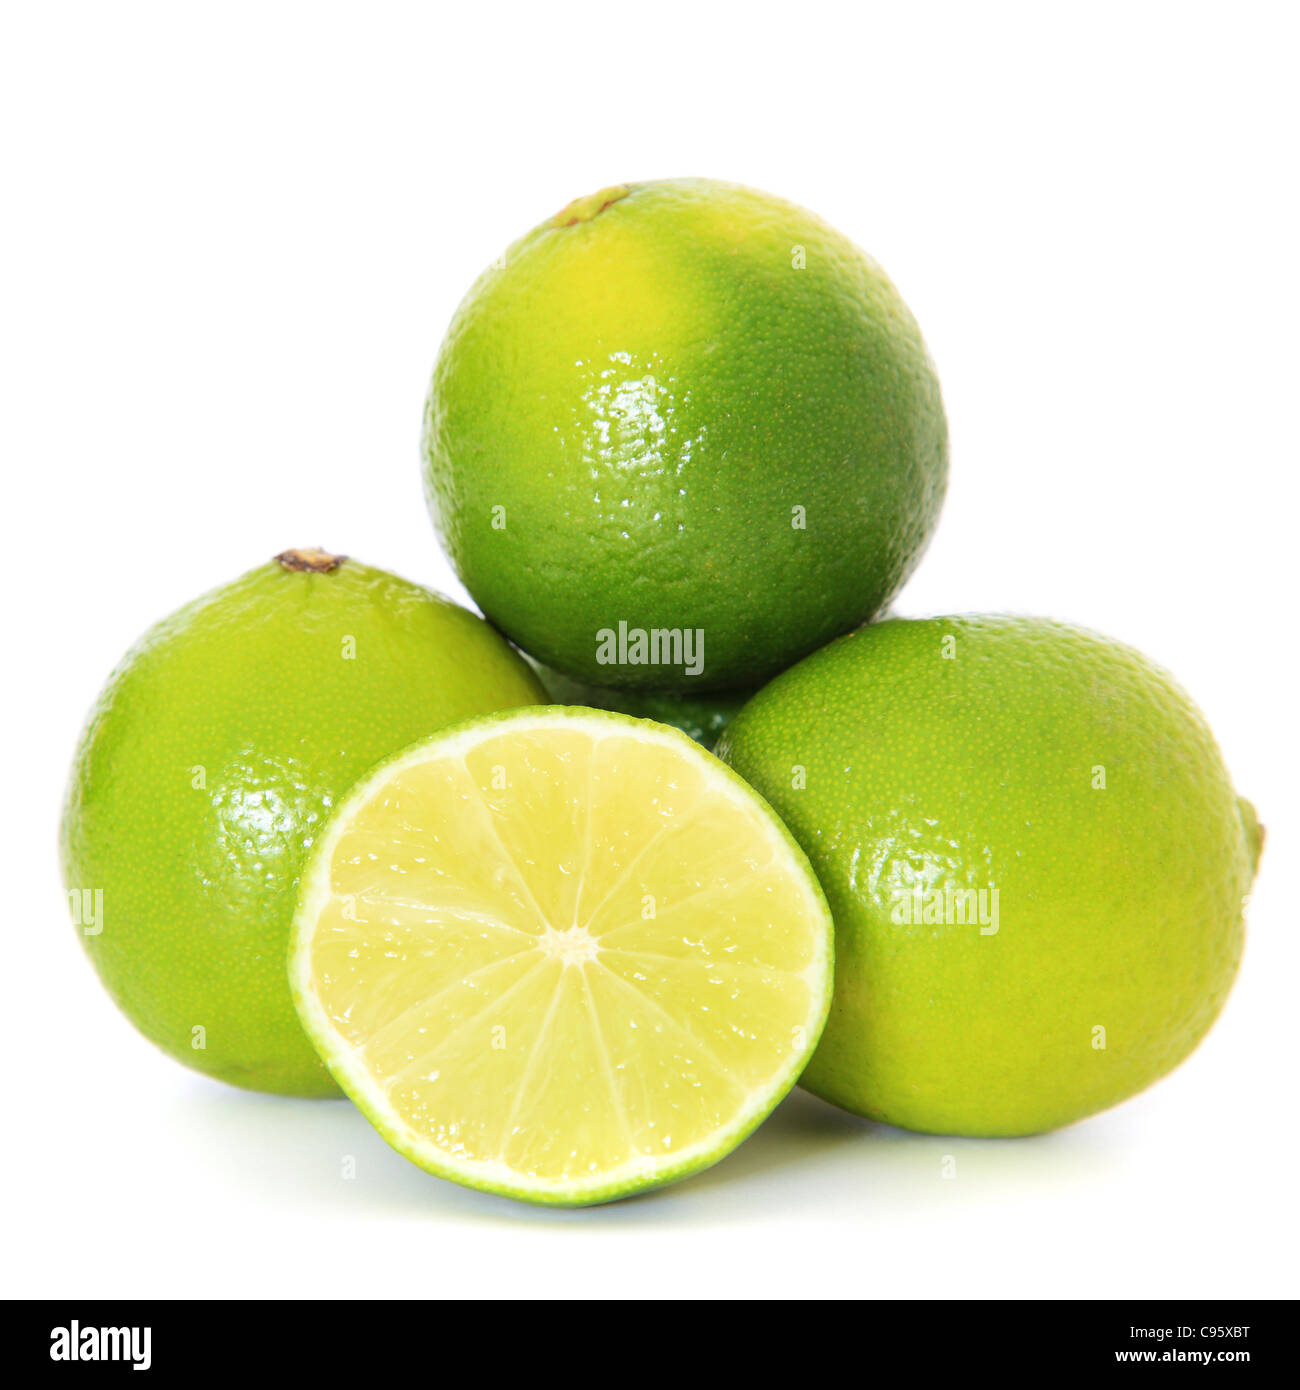 Pile of fine ripe limes. All on white background. Stock Photo